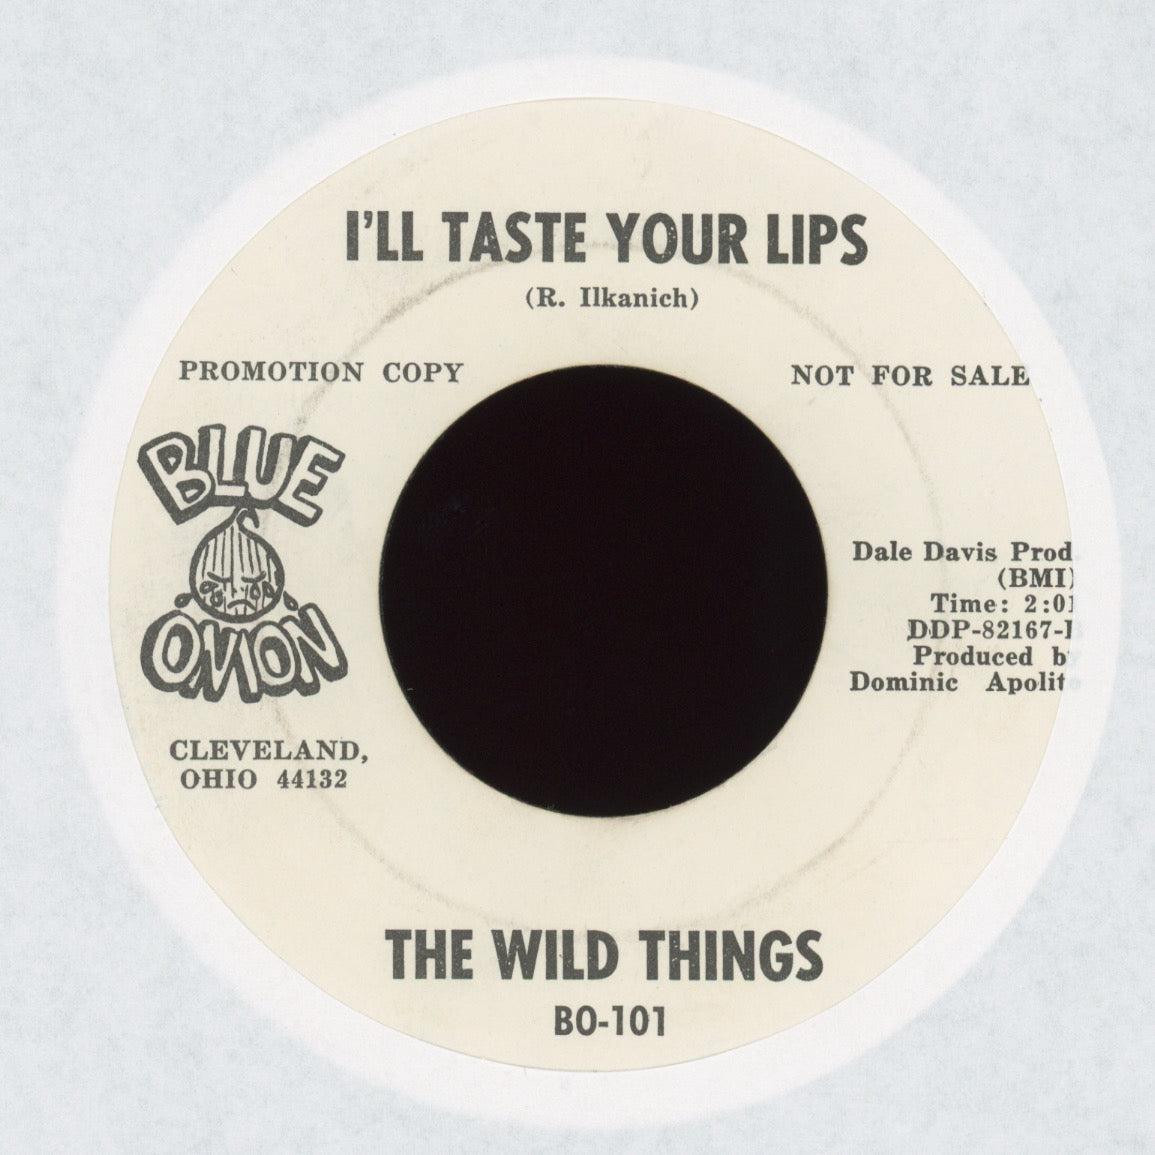 The Wild Things - Summer's Gone on Blue Onion Promo